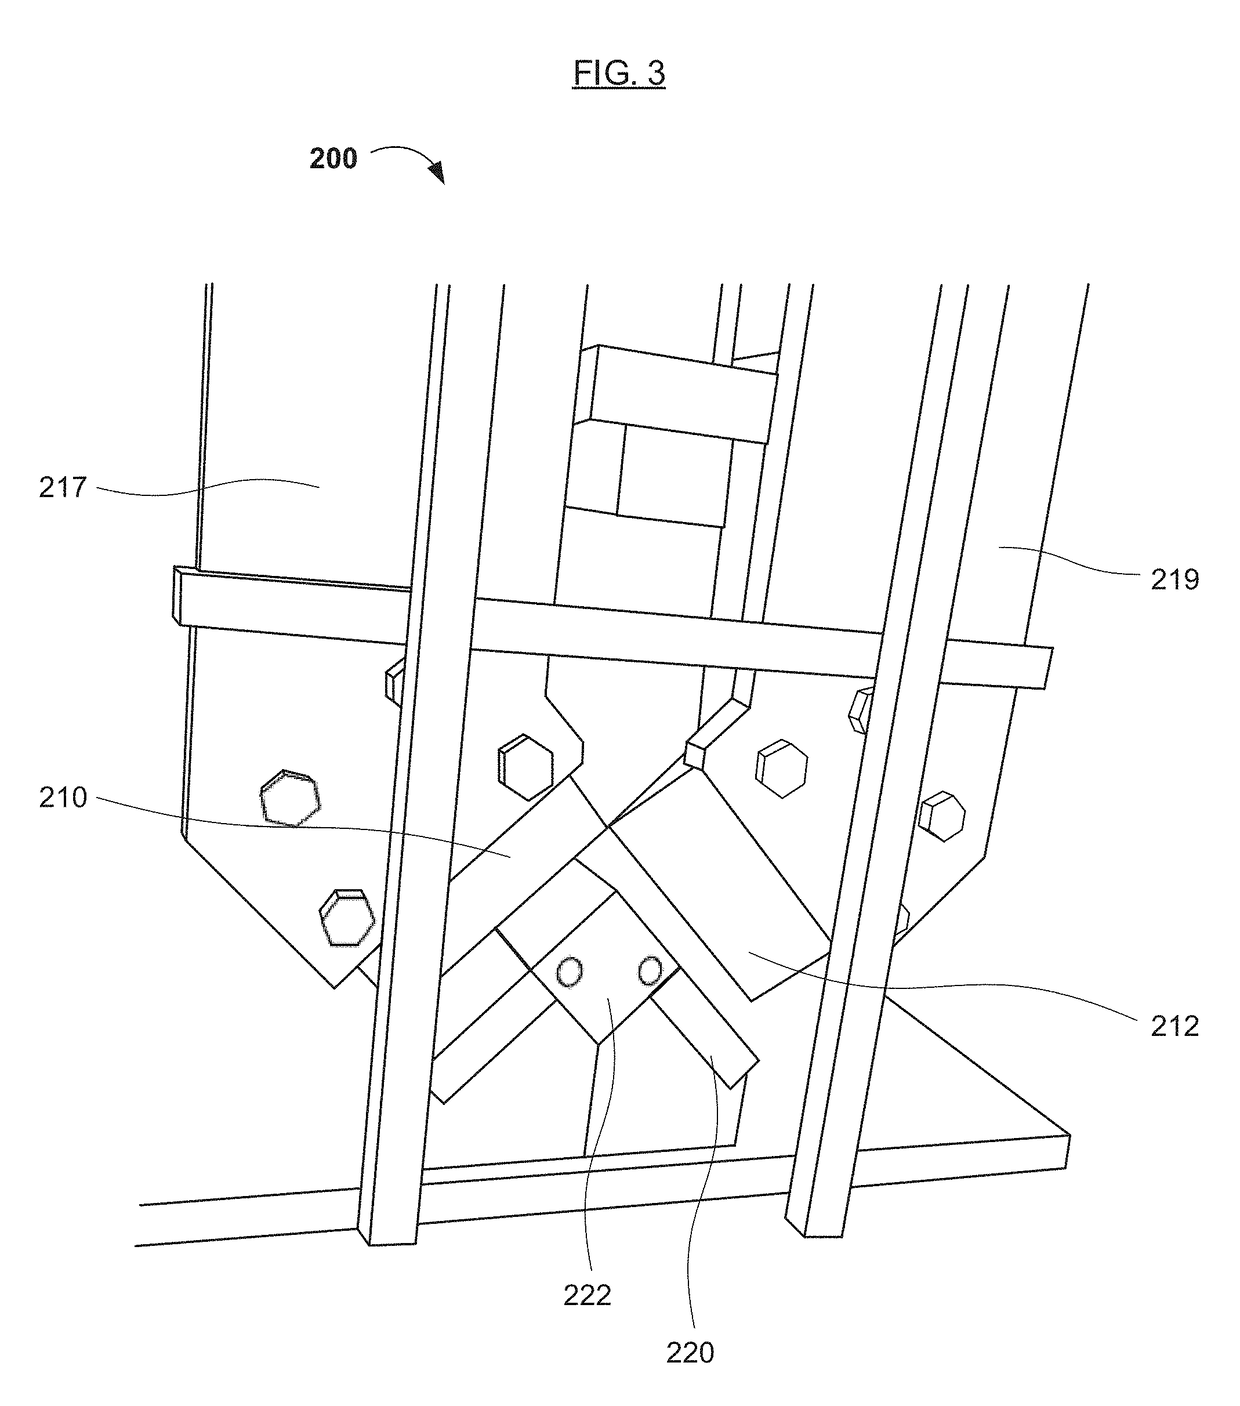 Apparatus and method for making corner boards for container assemblies